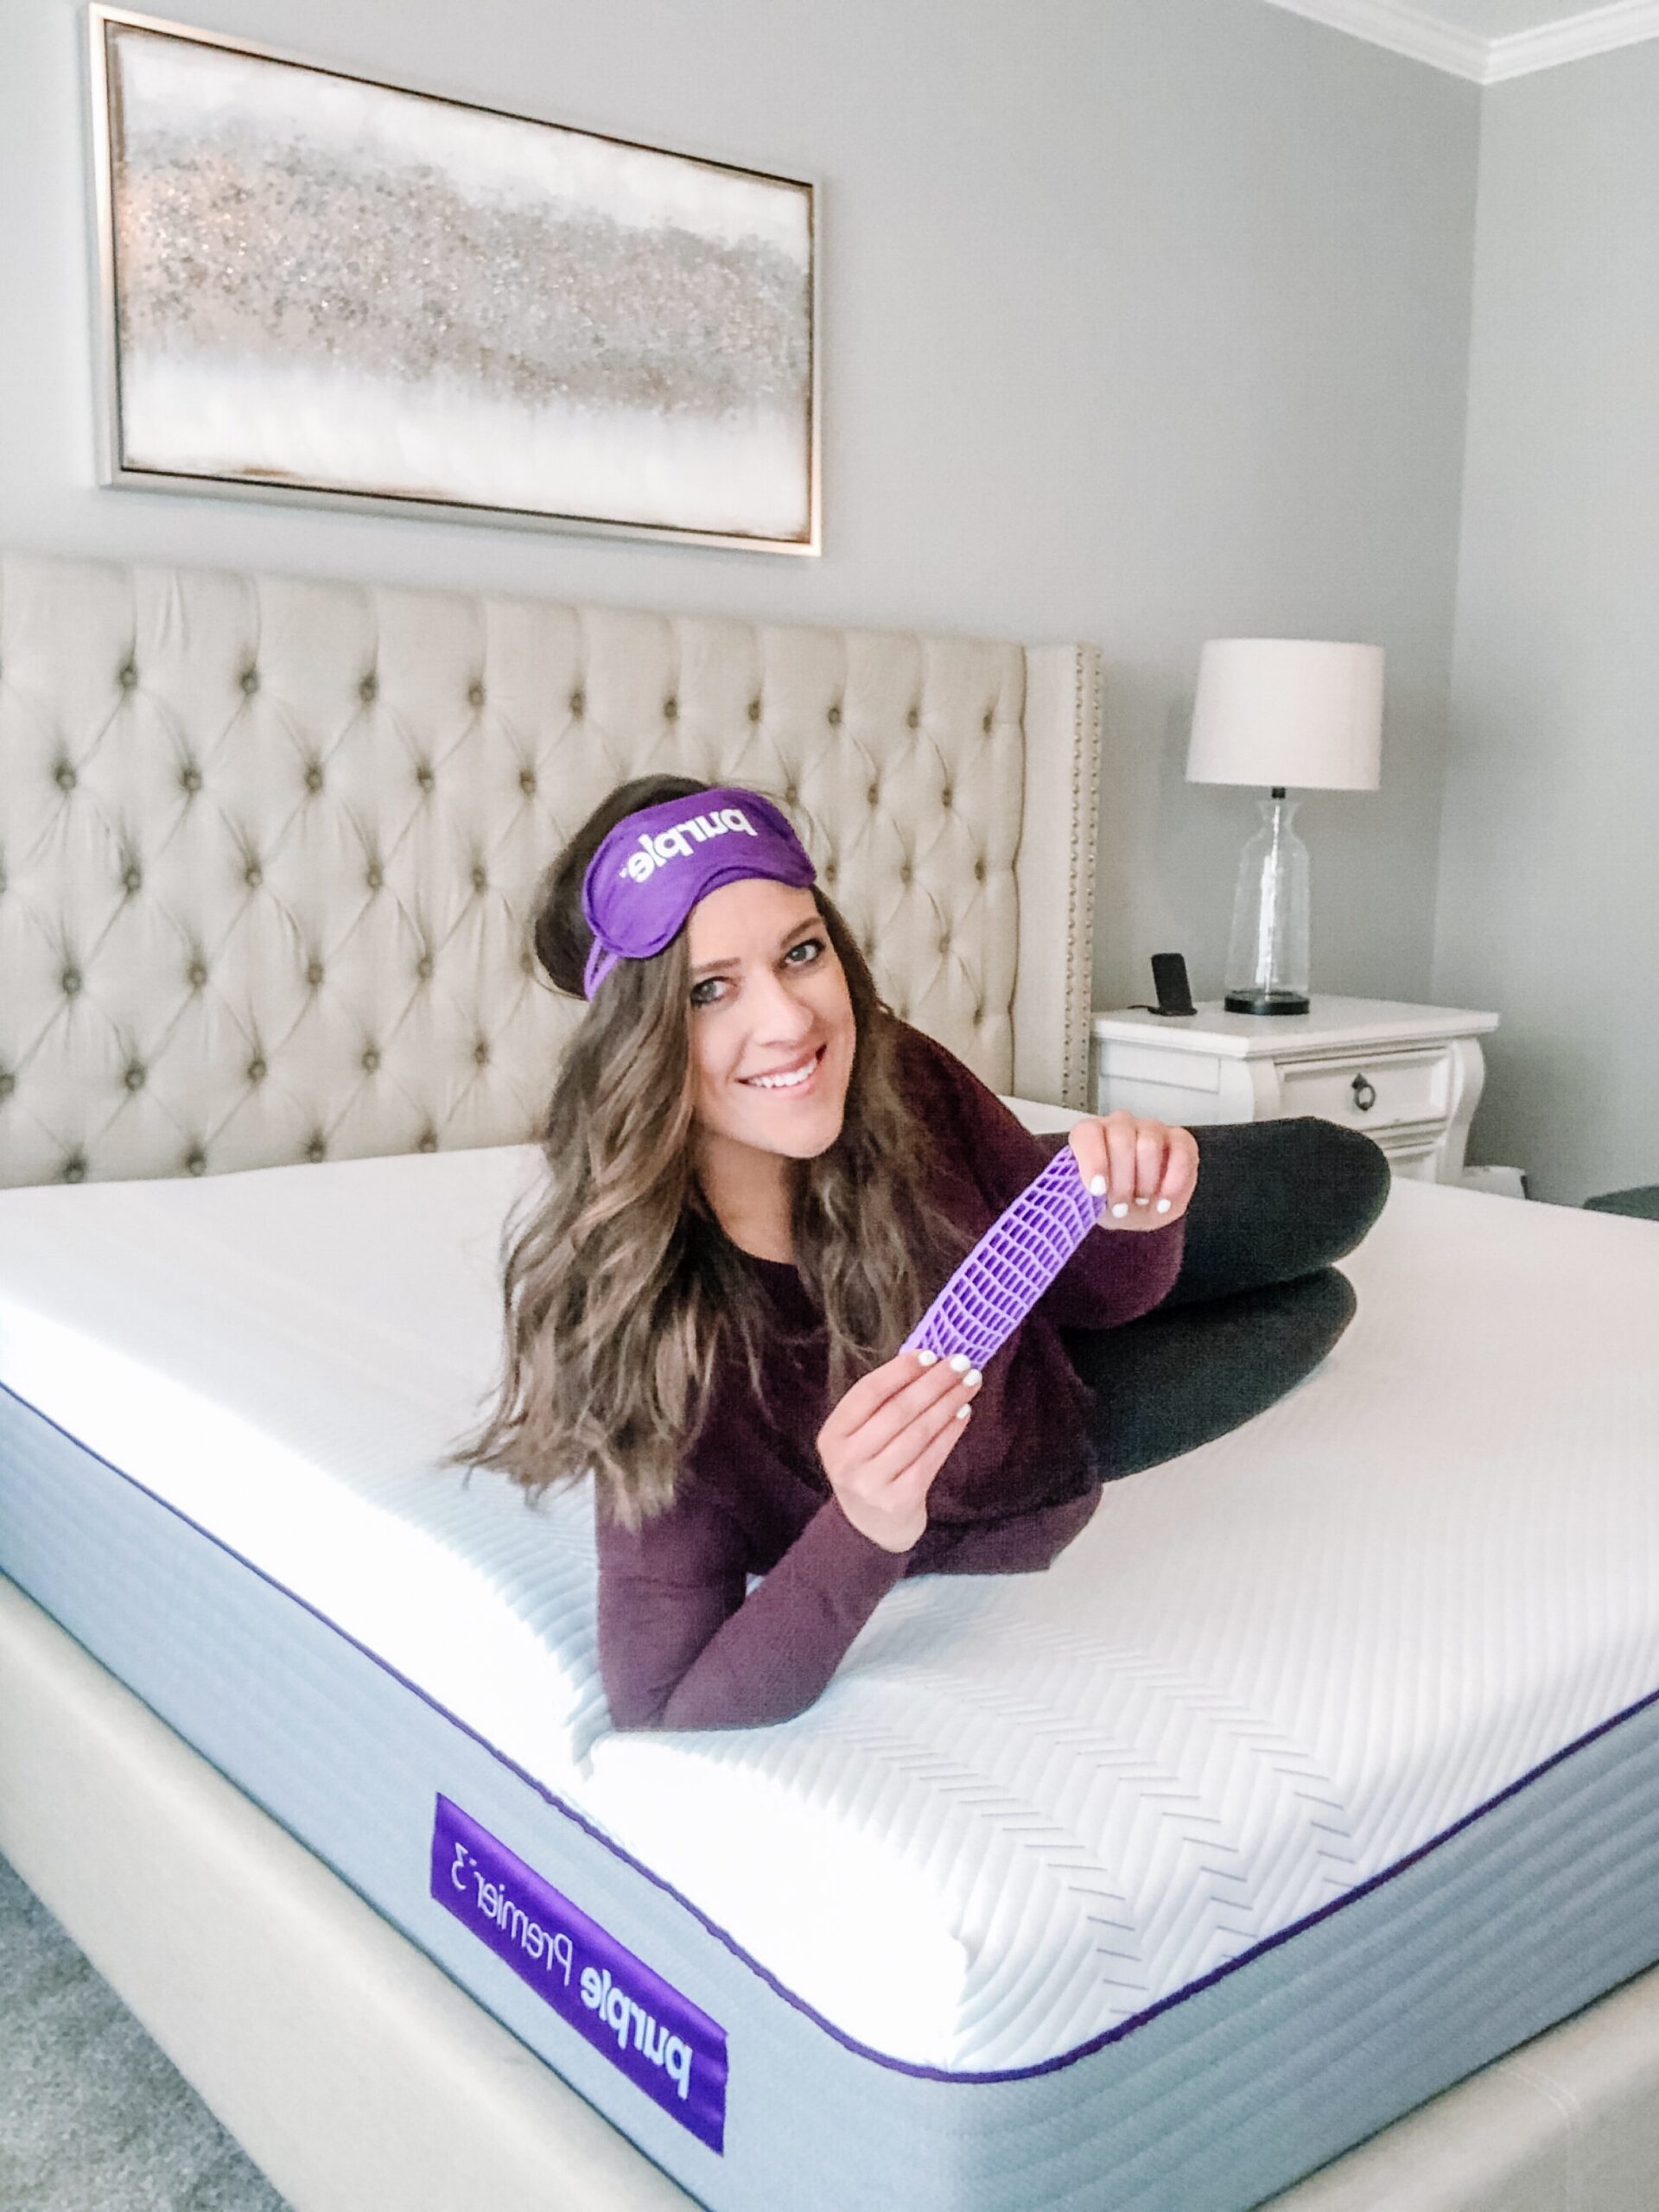 What Makes The Purple Mattress So Comfortable?